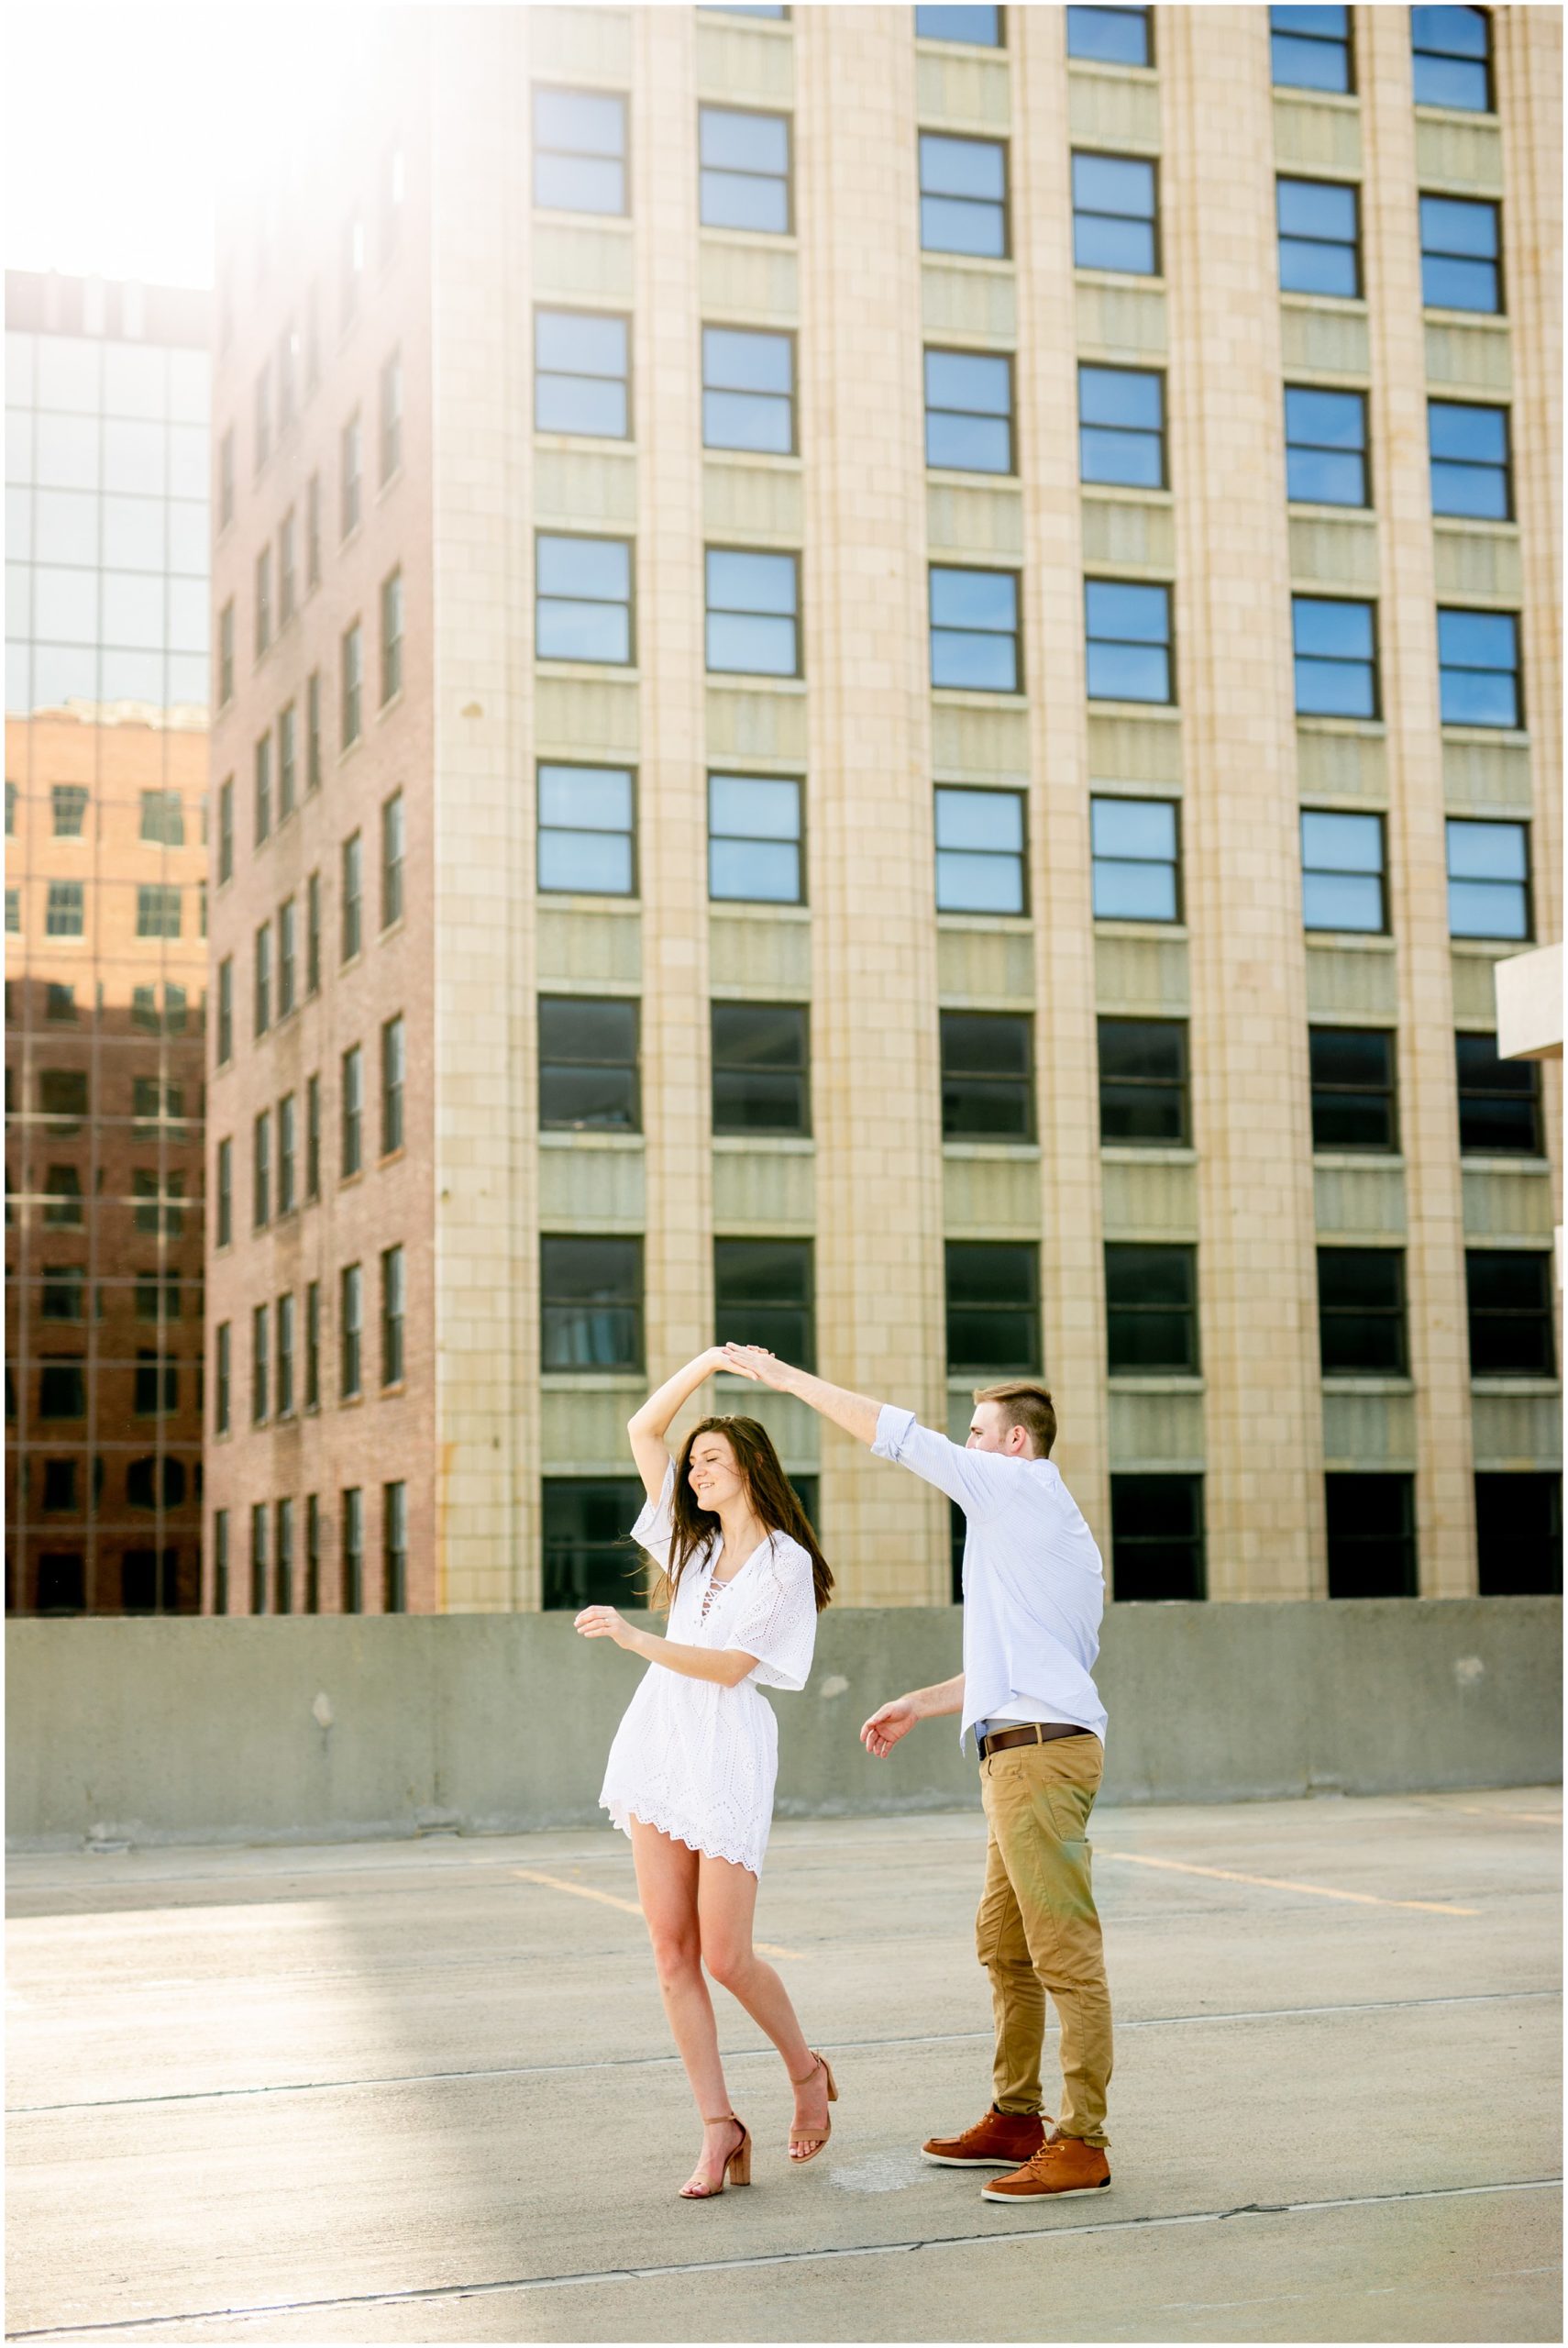 Downtown-Sioux-City-Engagement-Session-38.jpg